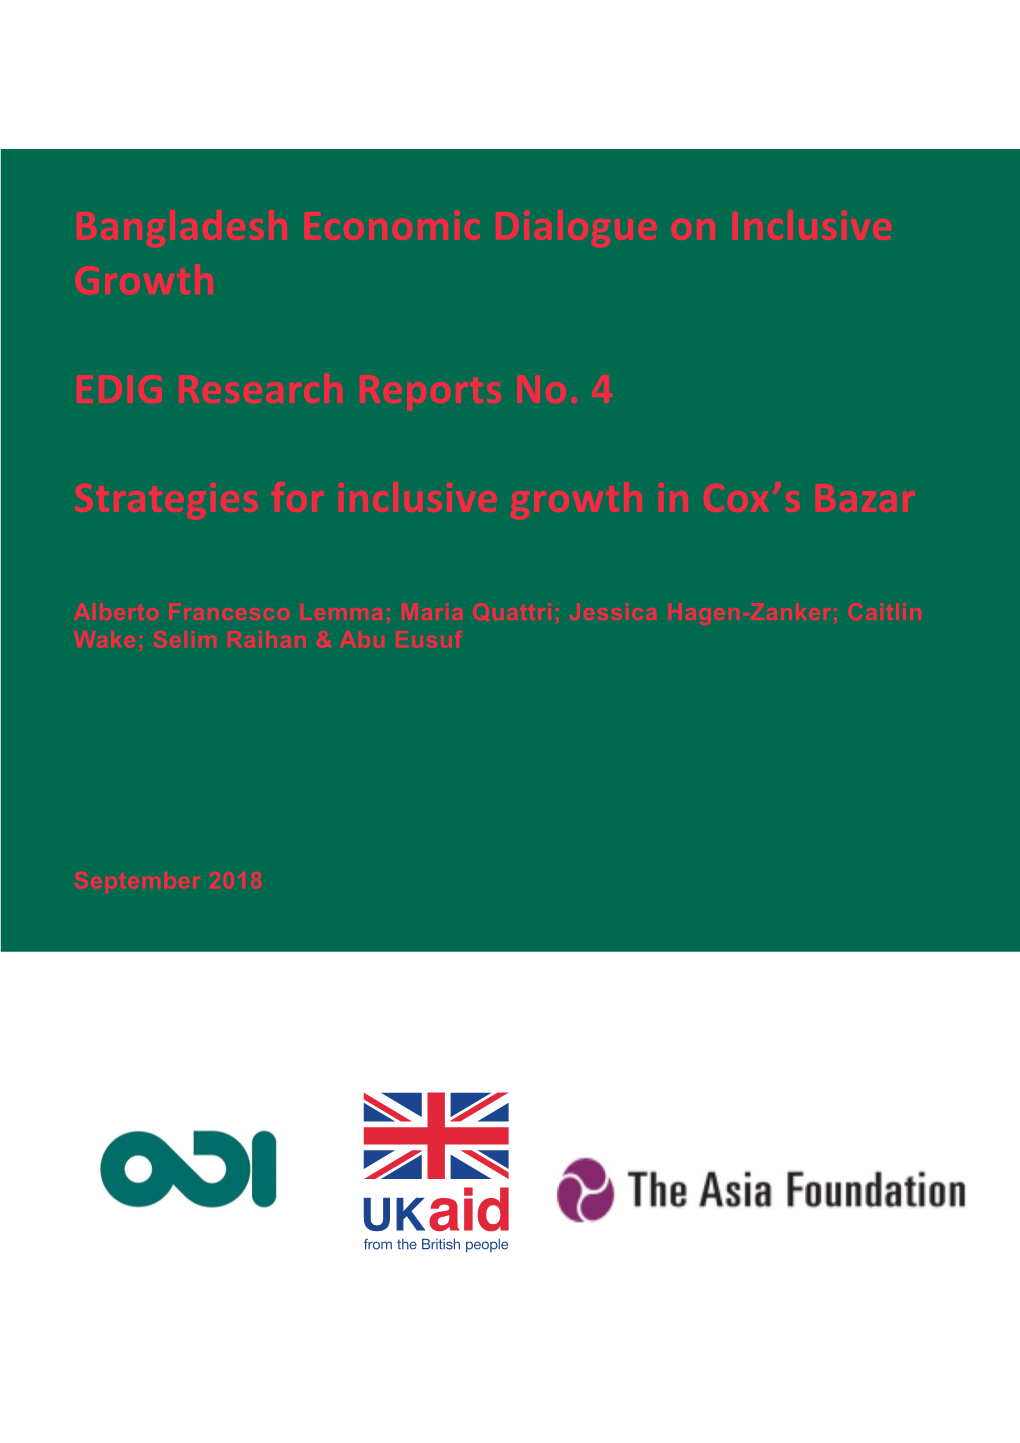 Bangladesh Economic Dialogue on Inclusive Growth EDIG Research